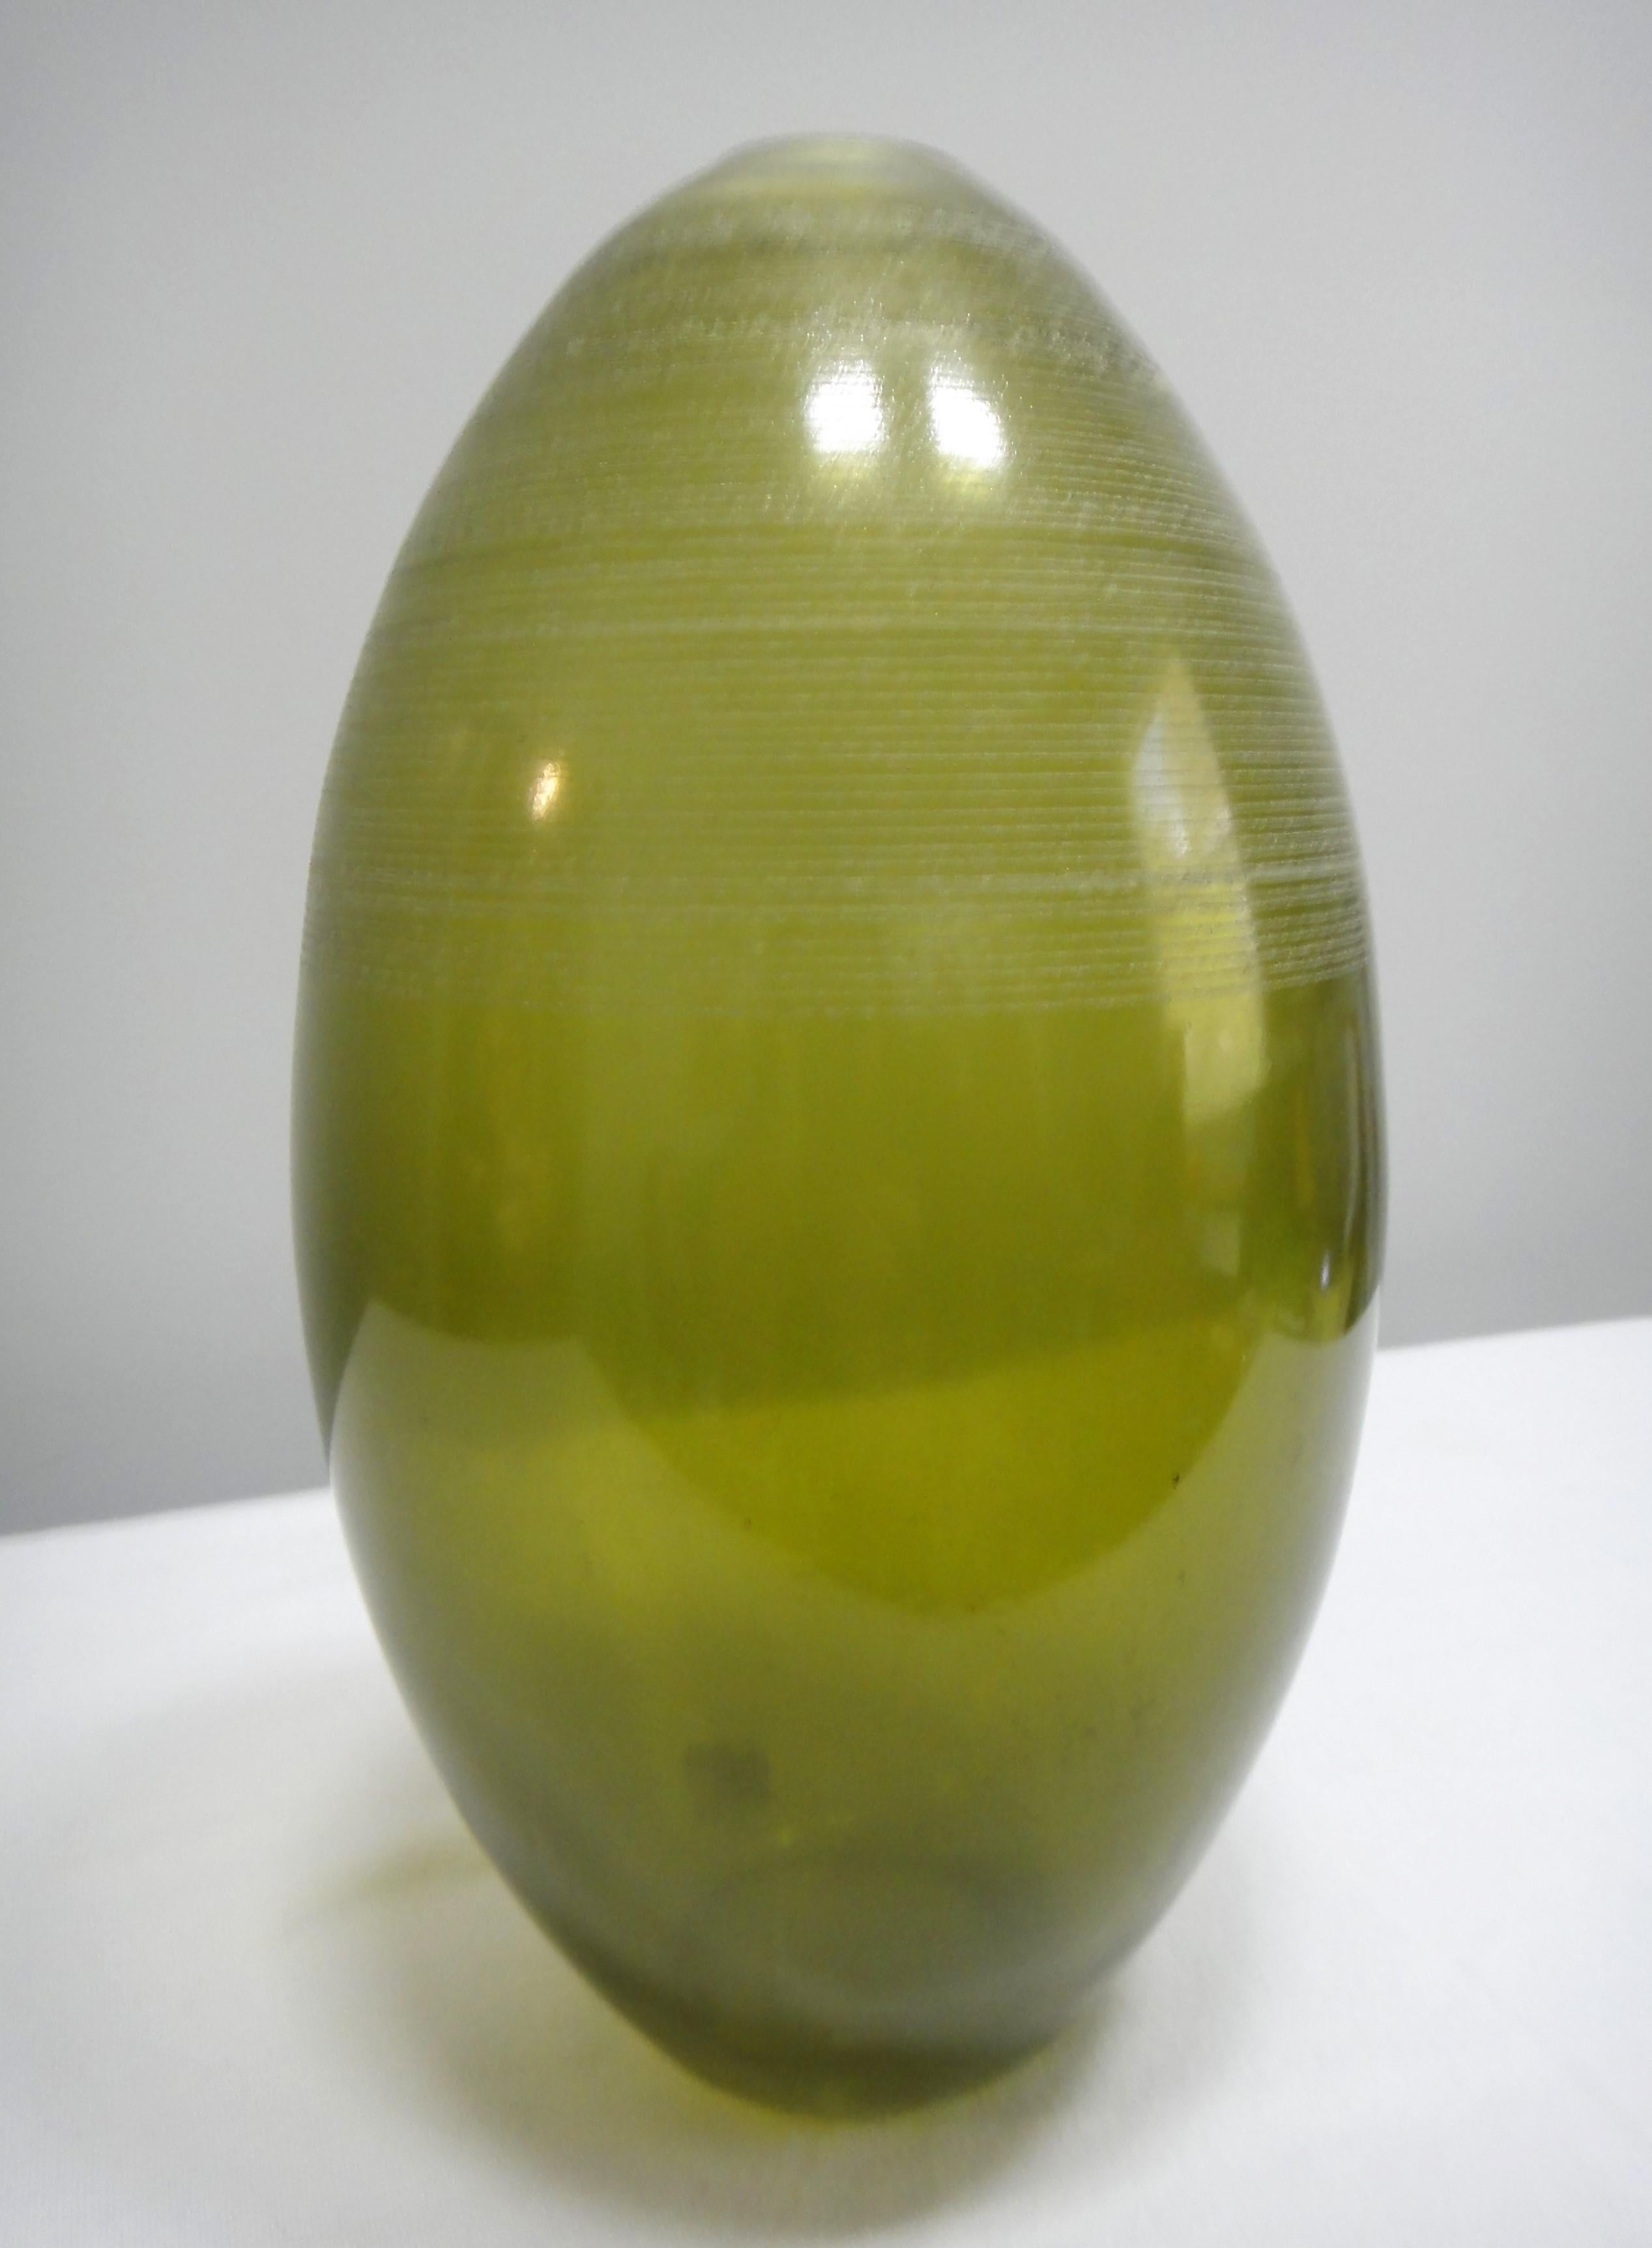 Barbini Murano glass vase green Italy

Barbini Murano glass vase offered  for sale is a large Barbini Murano glass vase. Alfredo Barbini, a glass artist born in 1912 on the islands of Murano in the lagoon of Venice, Italy, was one of Murano's